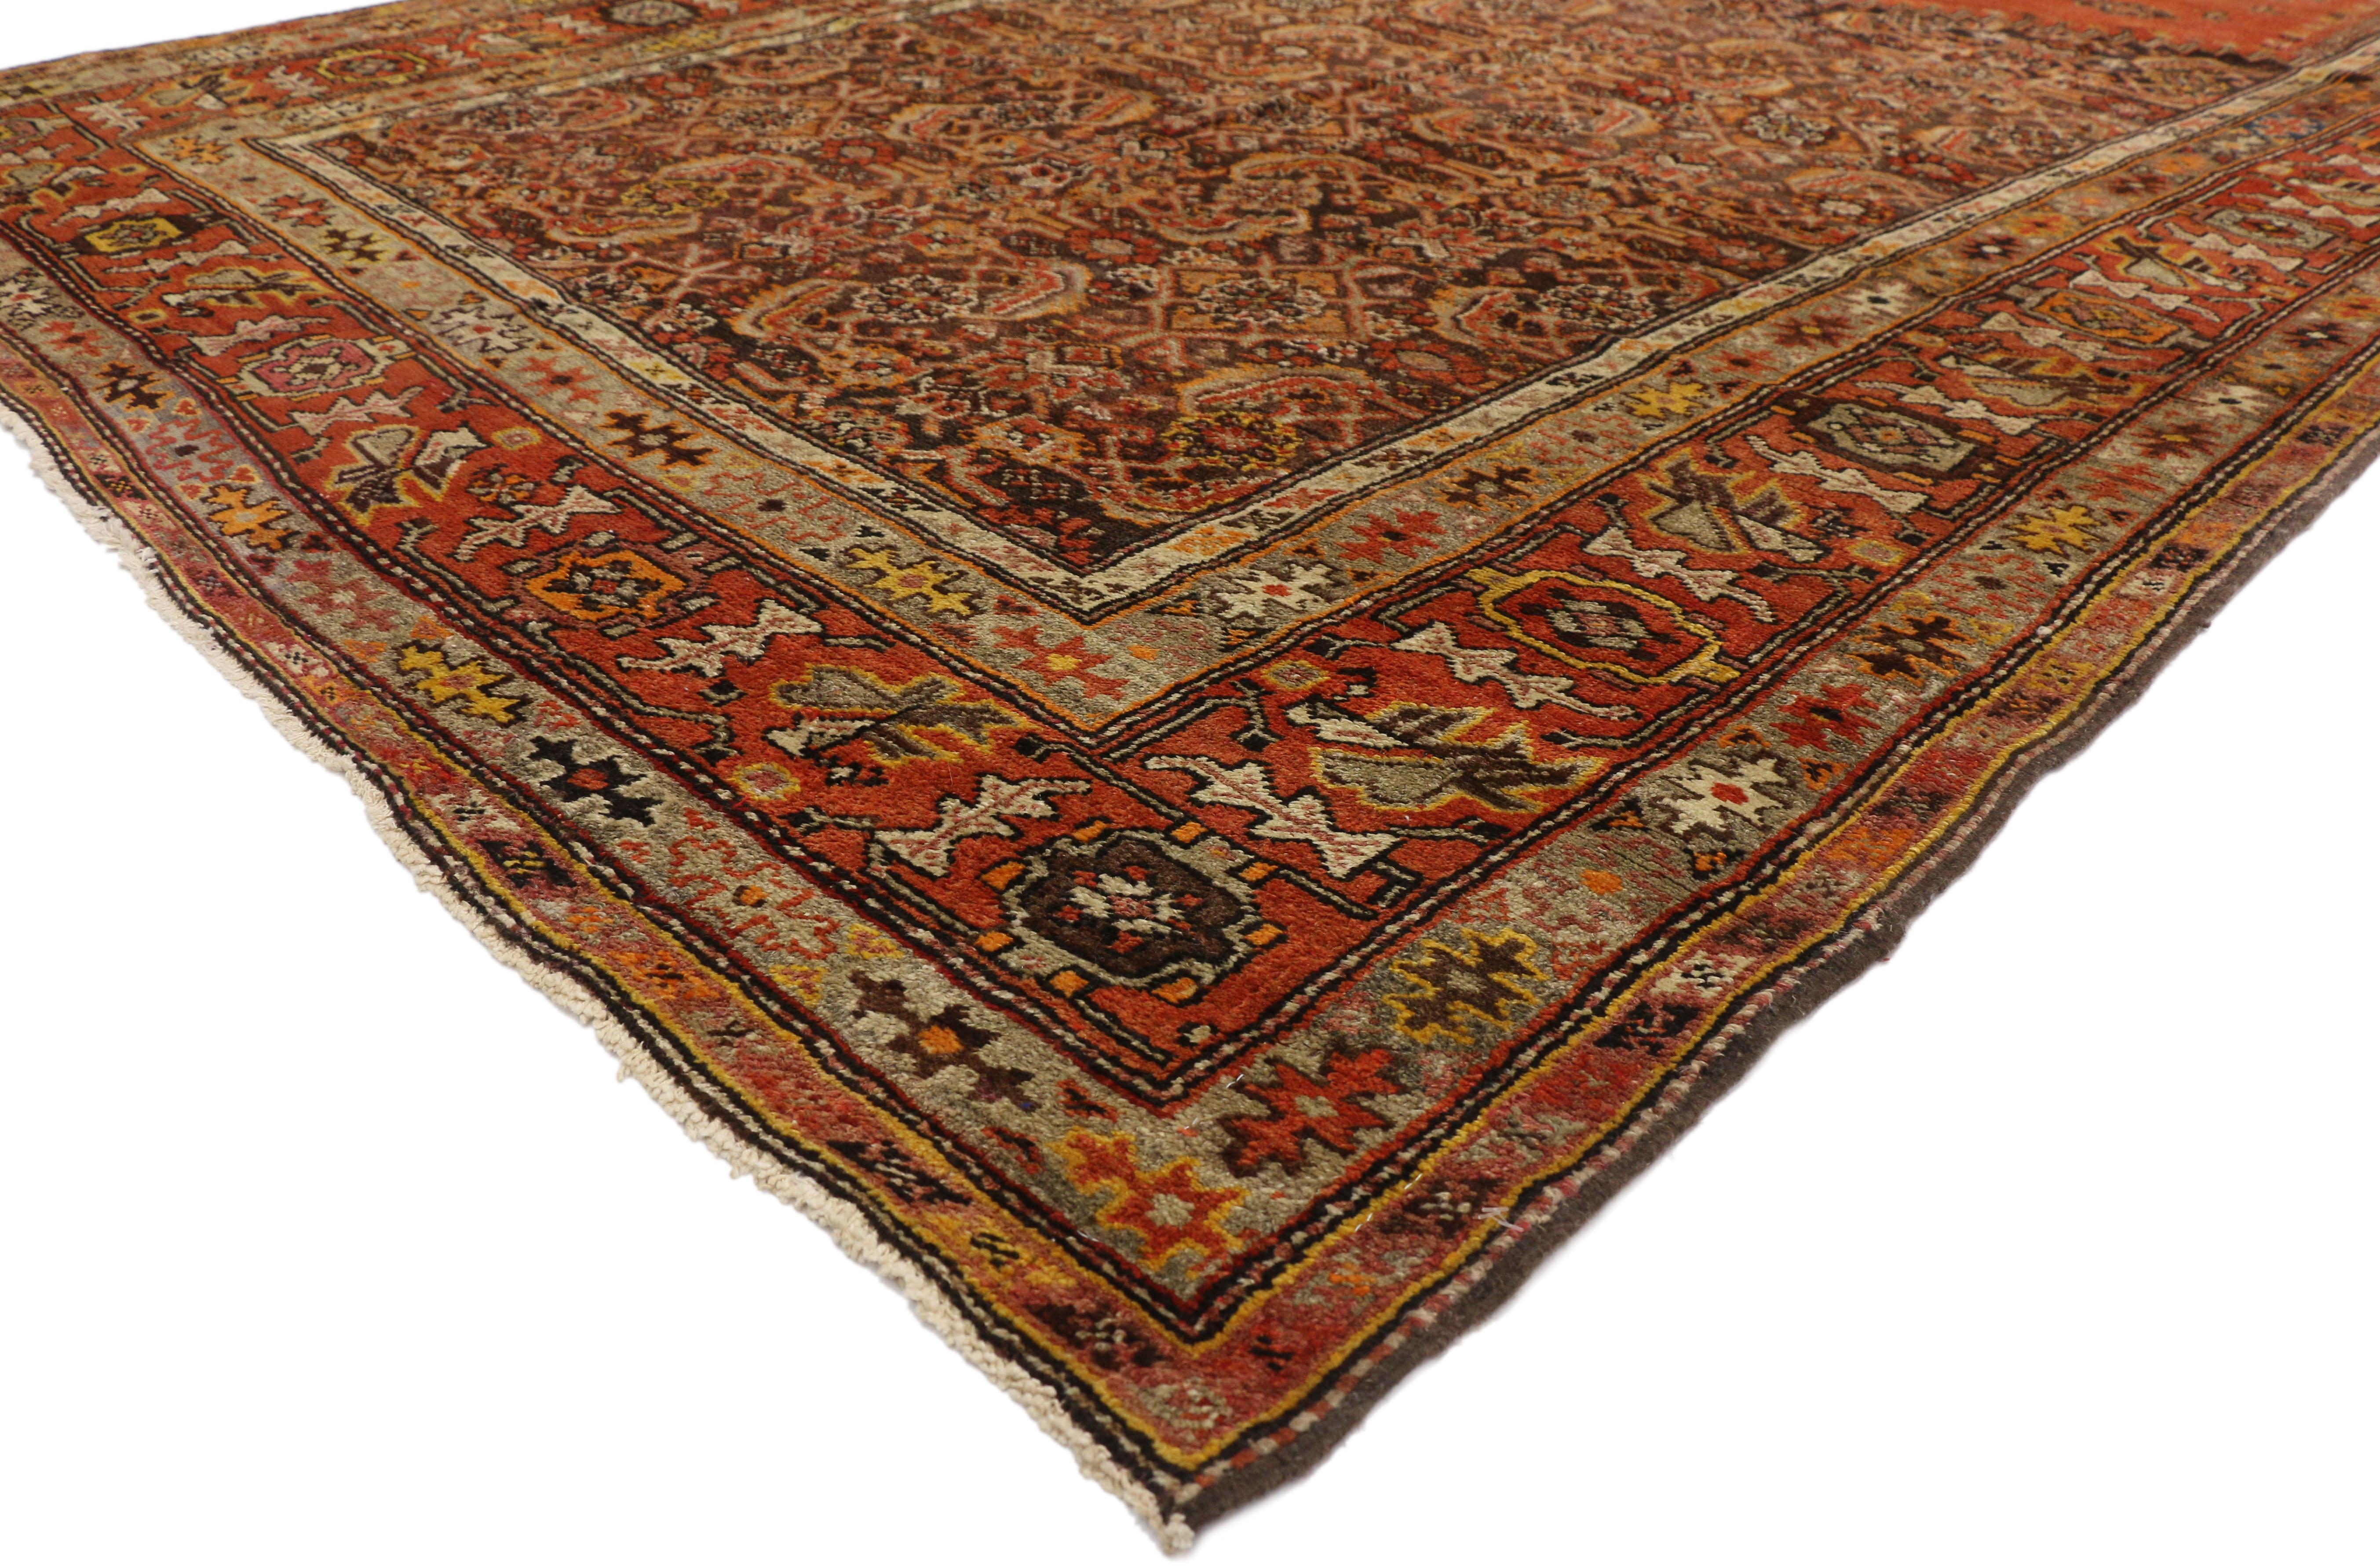 76488, antique Persian Malayer Gallery rug, long and wide Persian runner with Mid-Century Modern style. Create a warm and welcoming interior with this hand knotted wool antique Persian Malayer Gallery rug. It features a center latch-hook medallion